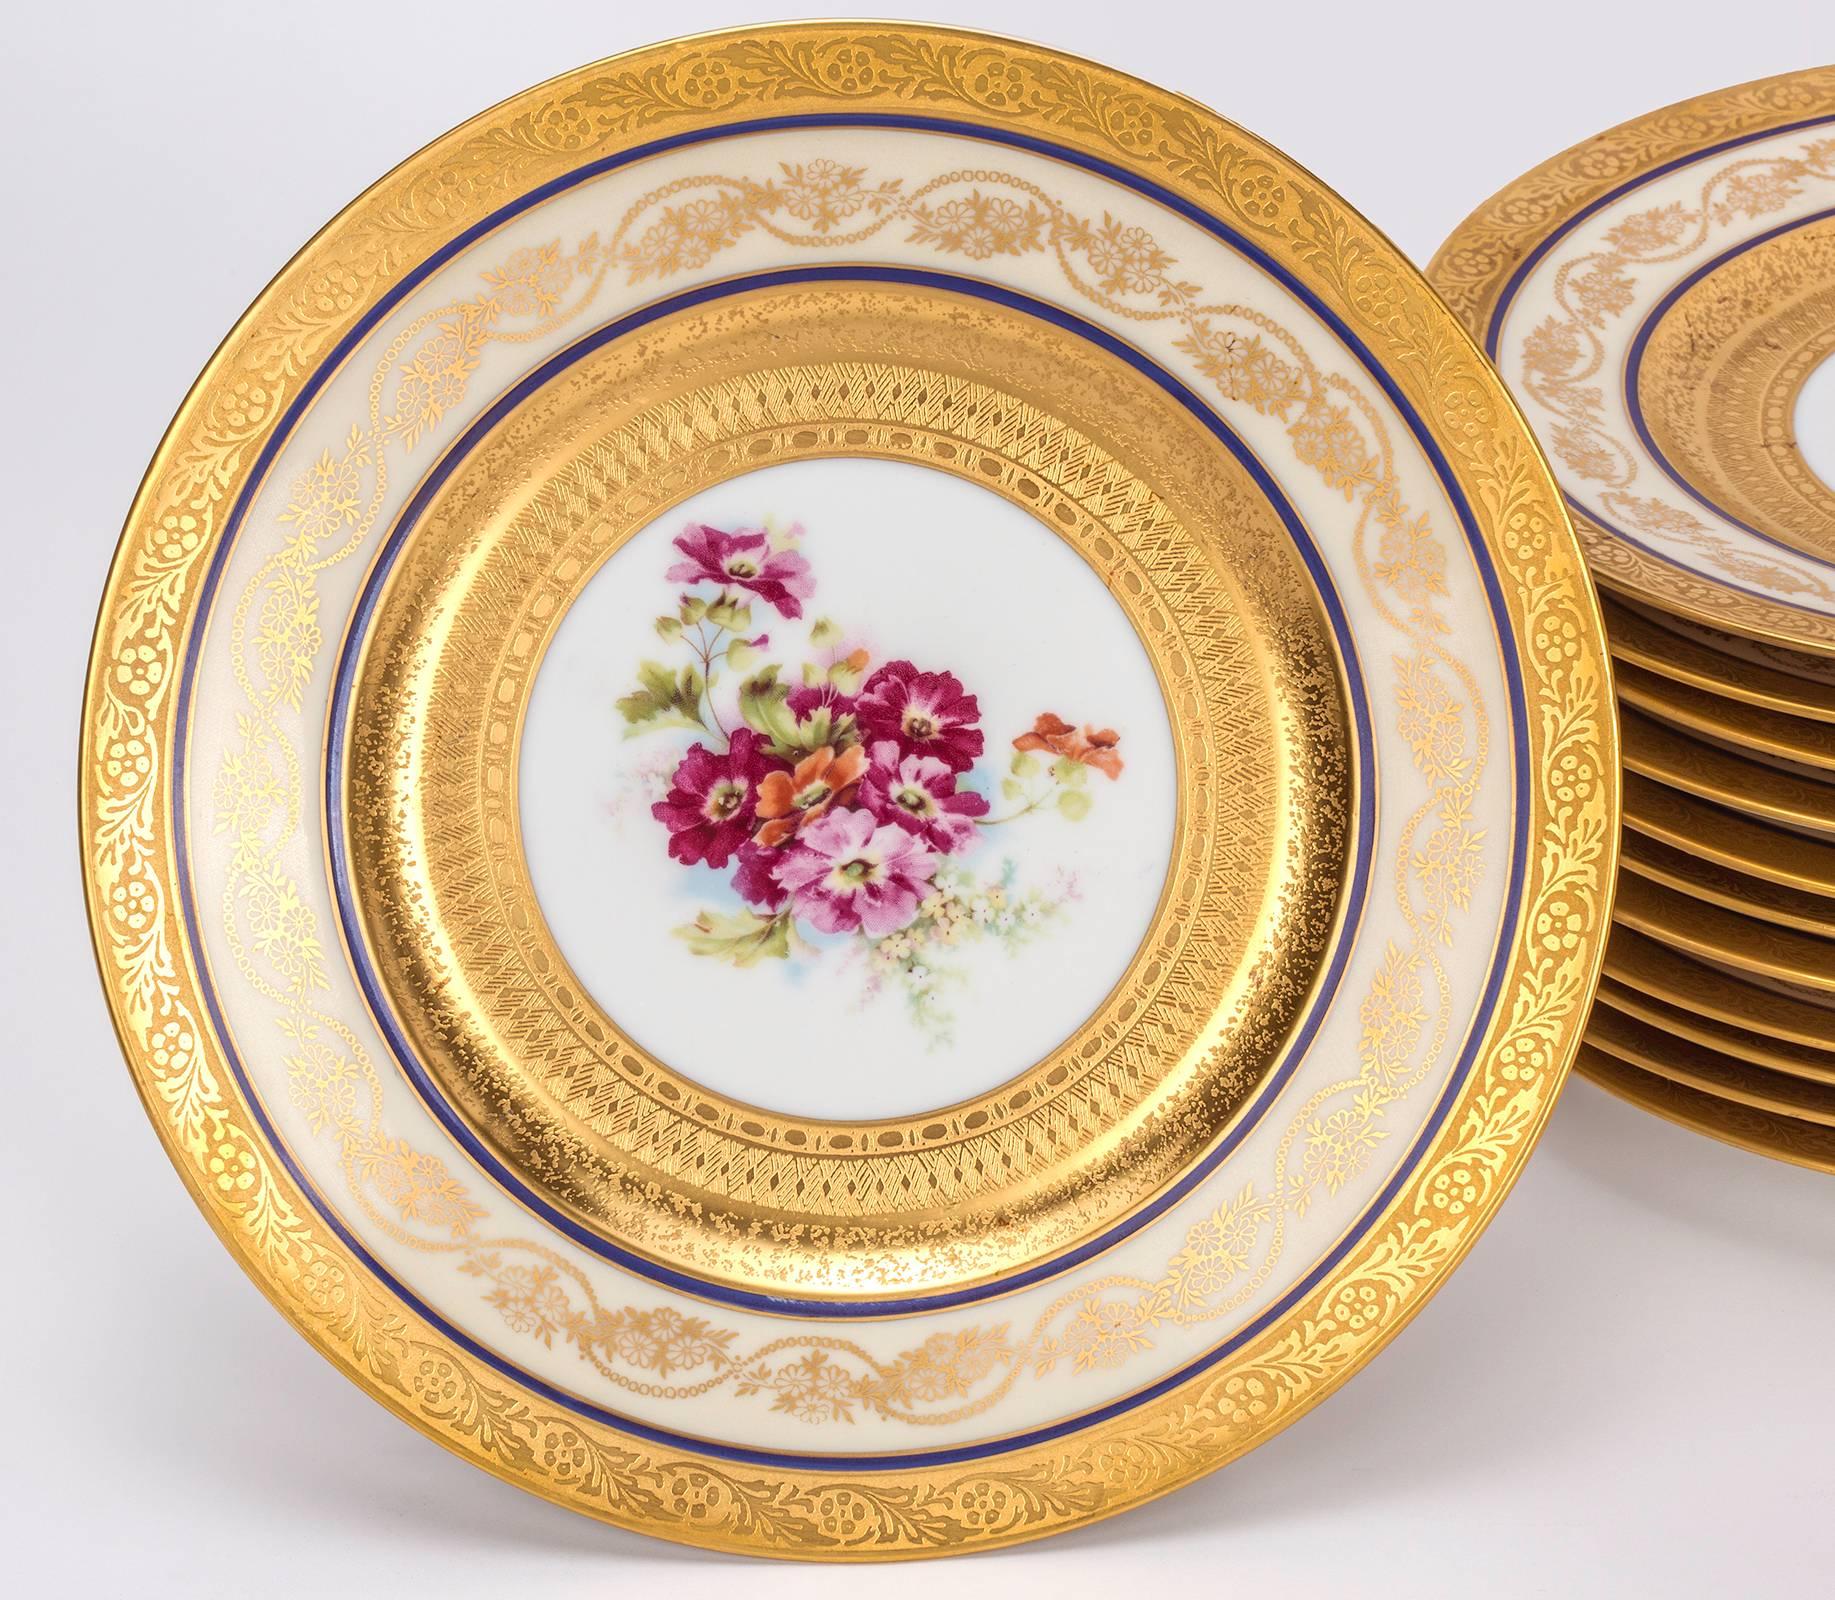 Beautiful set of 12 porcelain dinner plates. Exquisite set in  florals and 24-karat Gold trim. Marked 